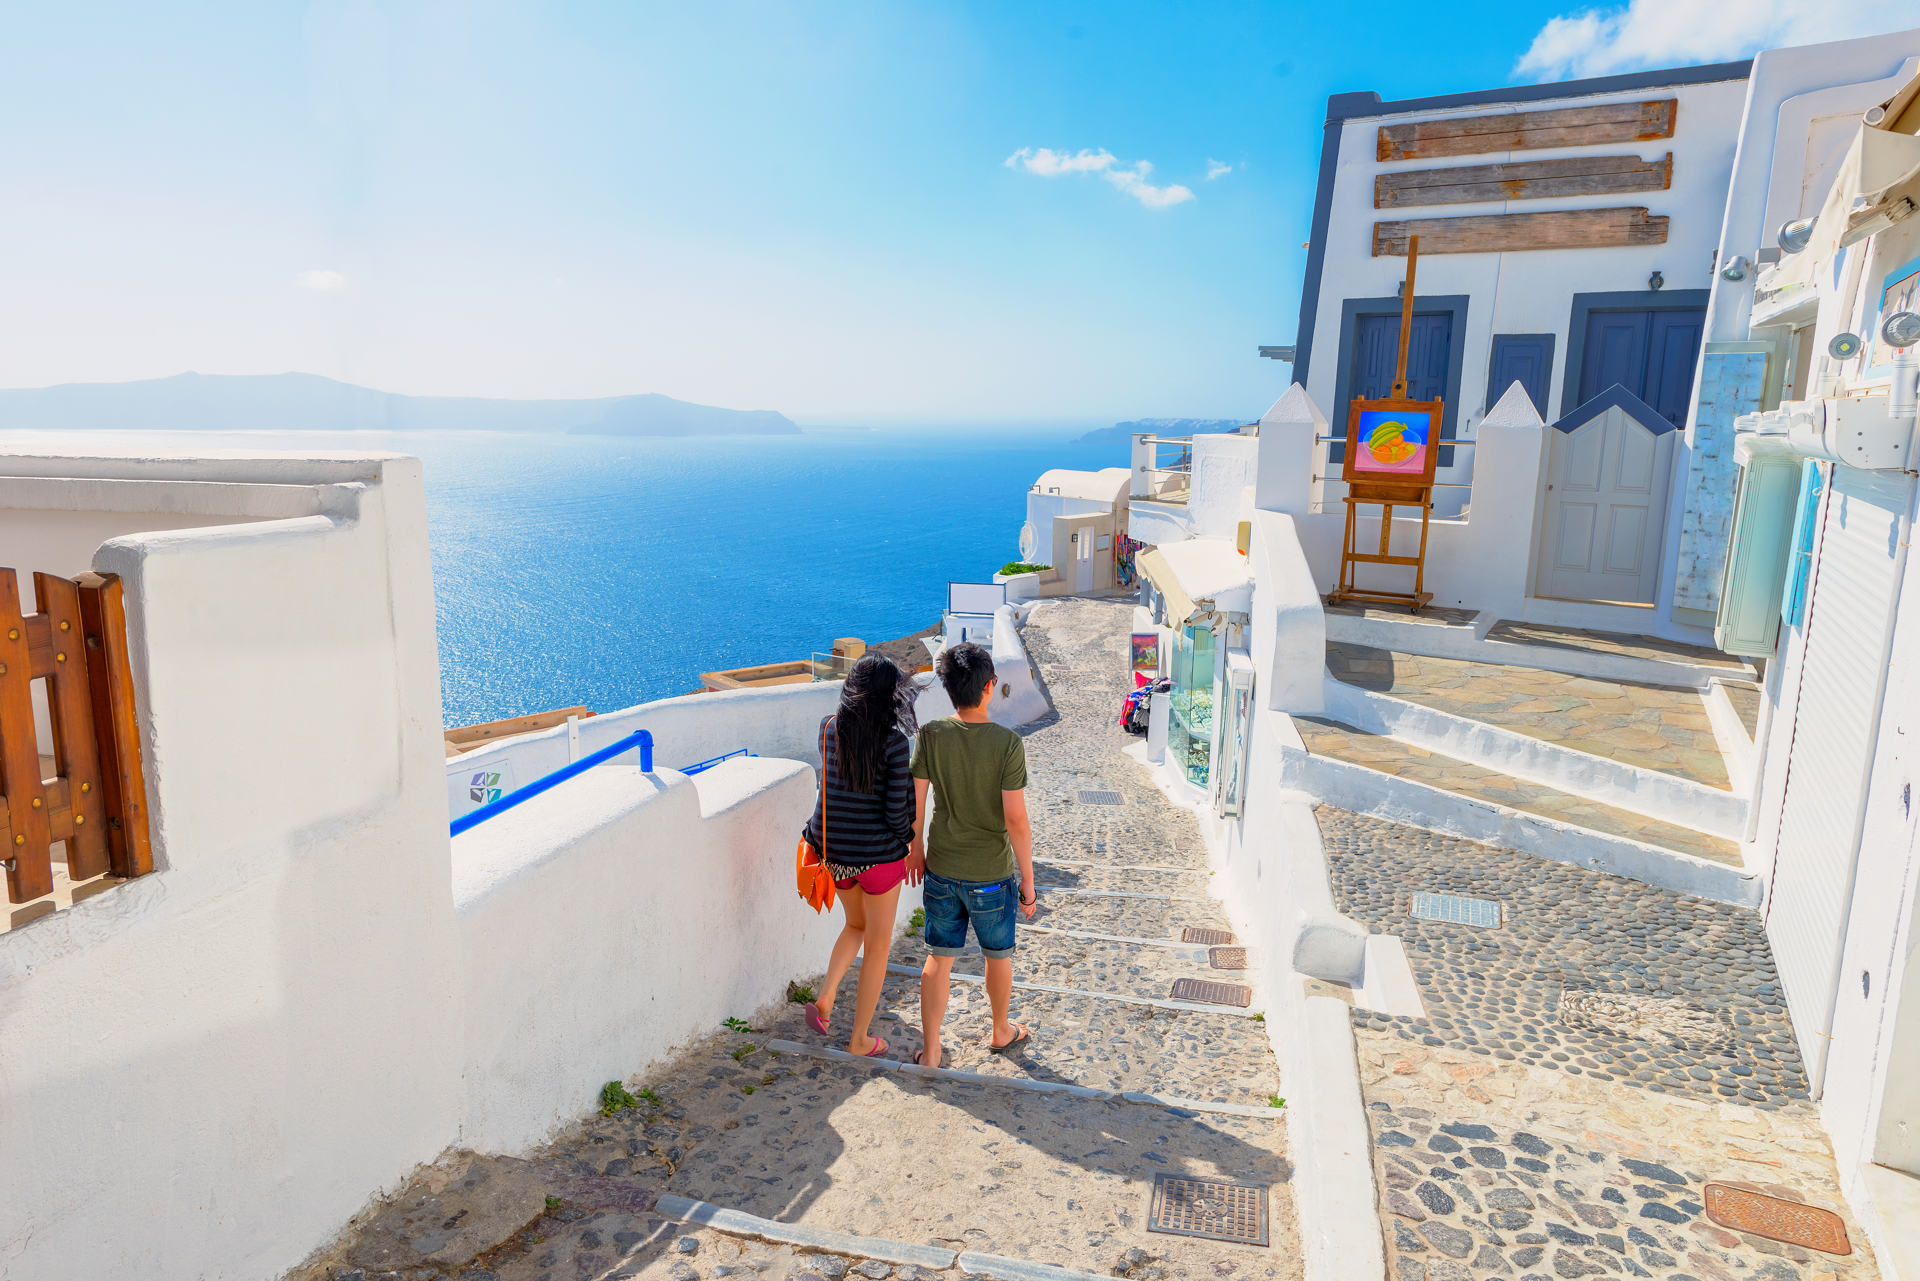 The famous island of Santorini in the Cyclades, panoramic view of traditional whitewashed houses and colorful caldera